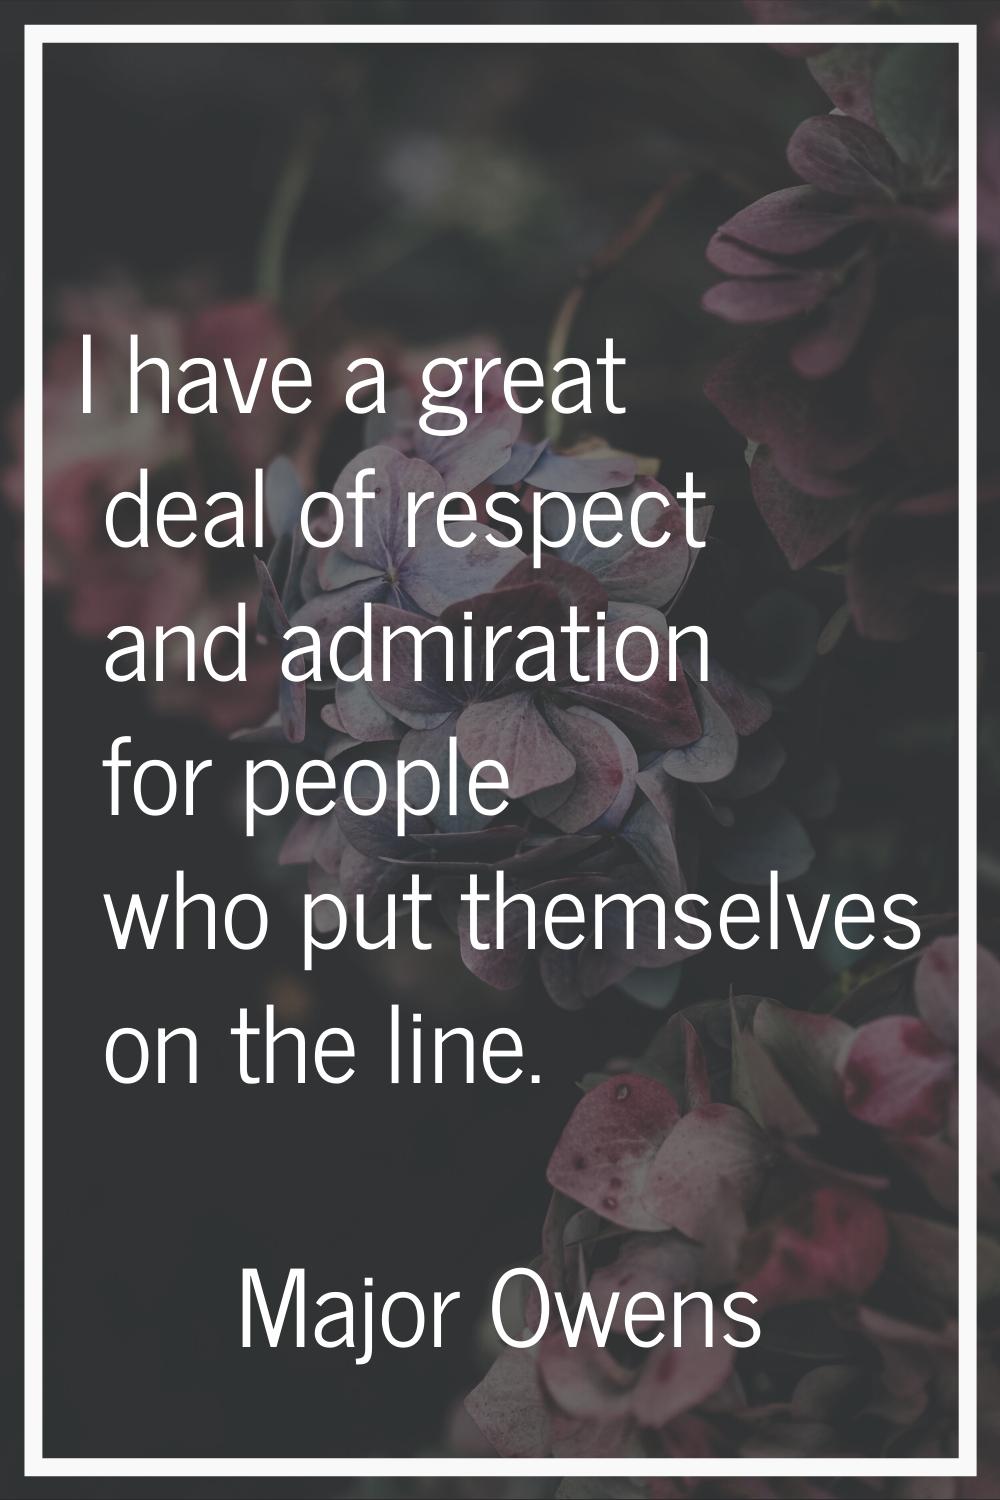 I have a great deal of respect and admiration for people who put themselves on the line.